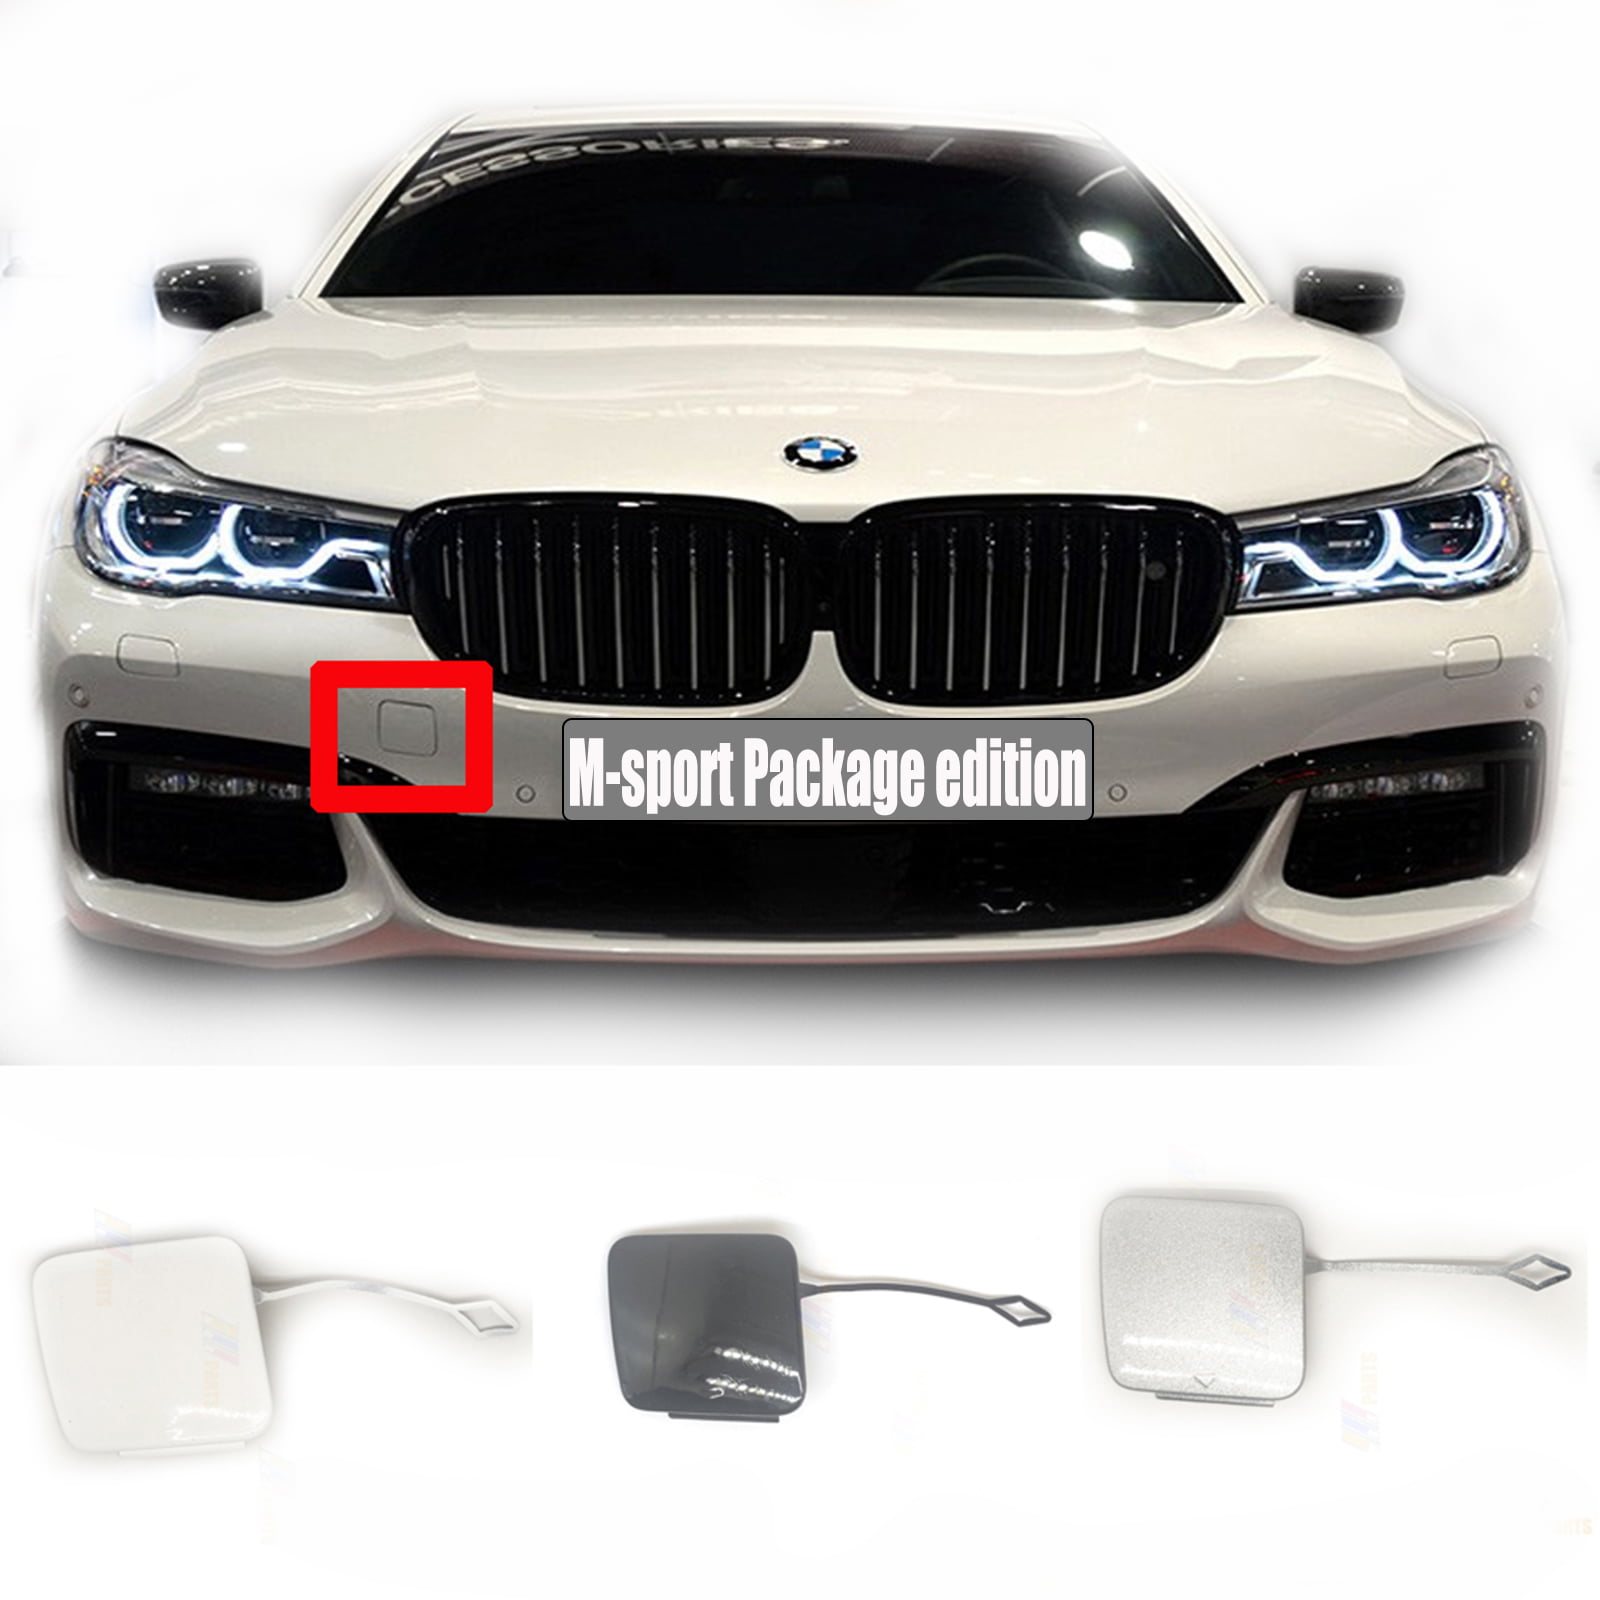  Car Cover Waterproof Breathable for BMW 7 Series 745Le